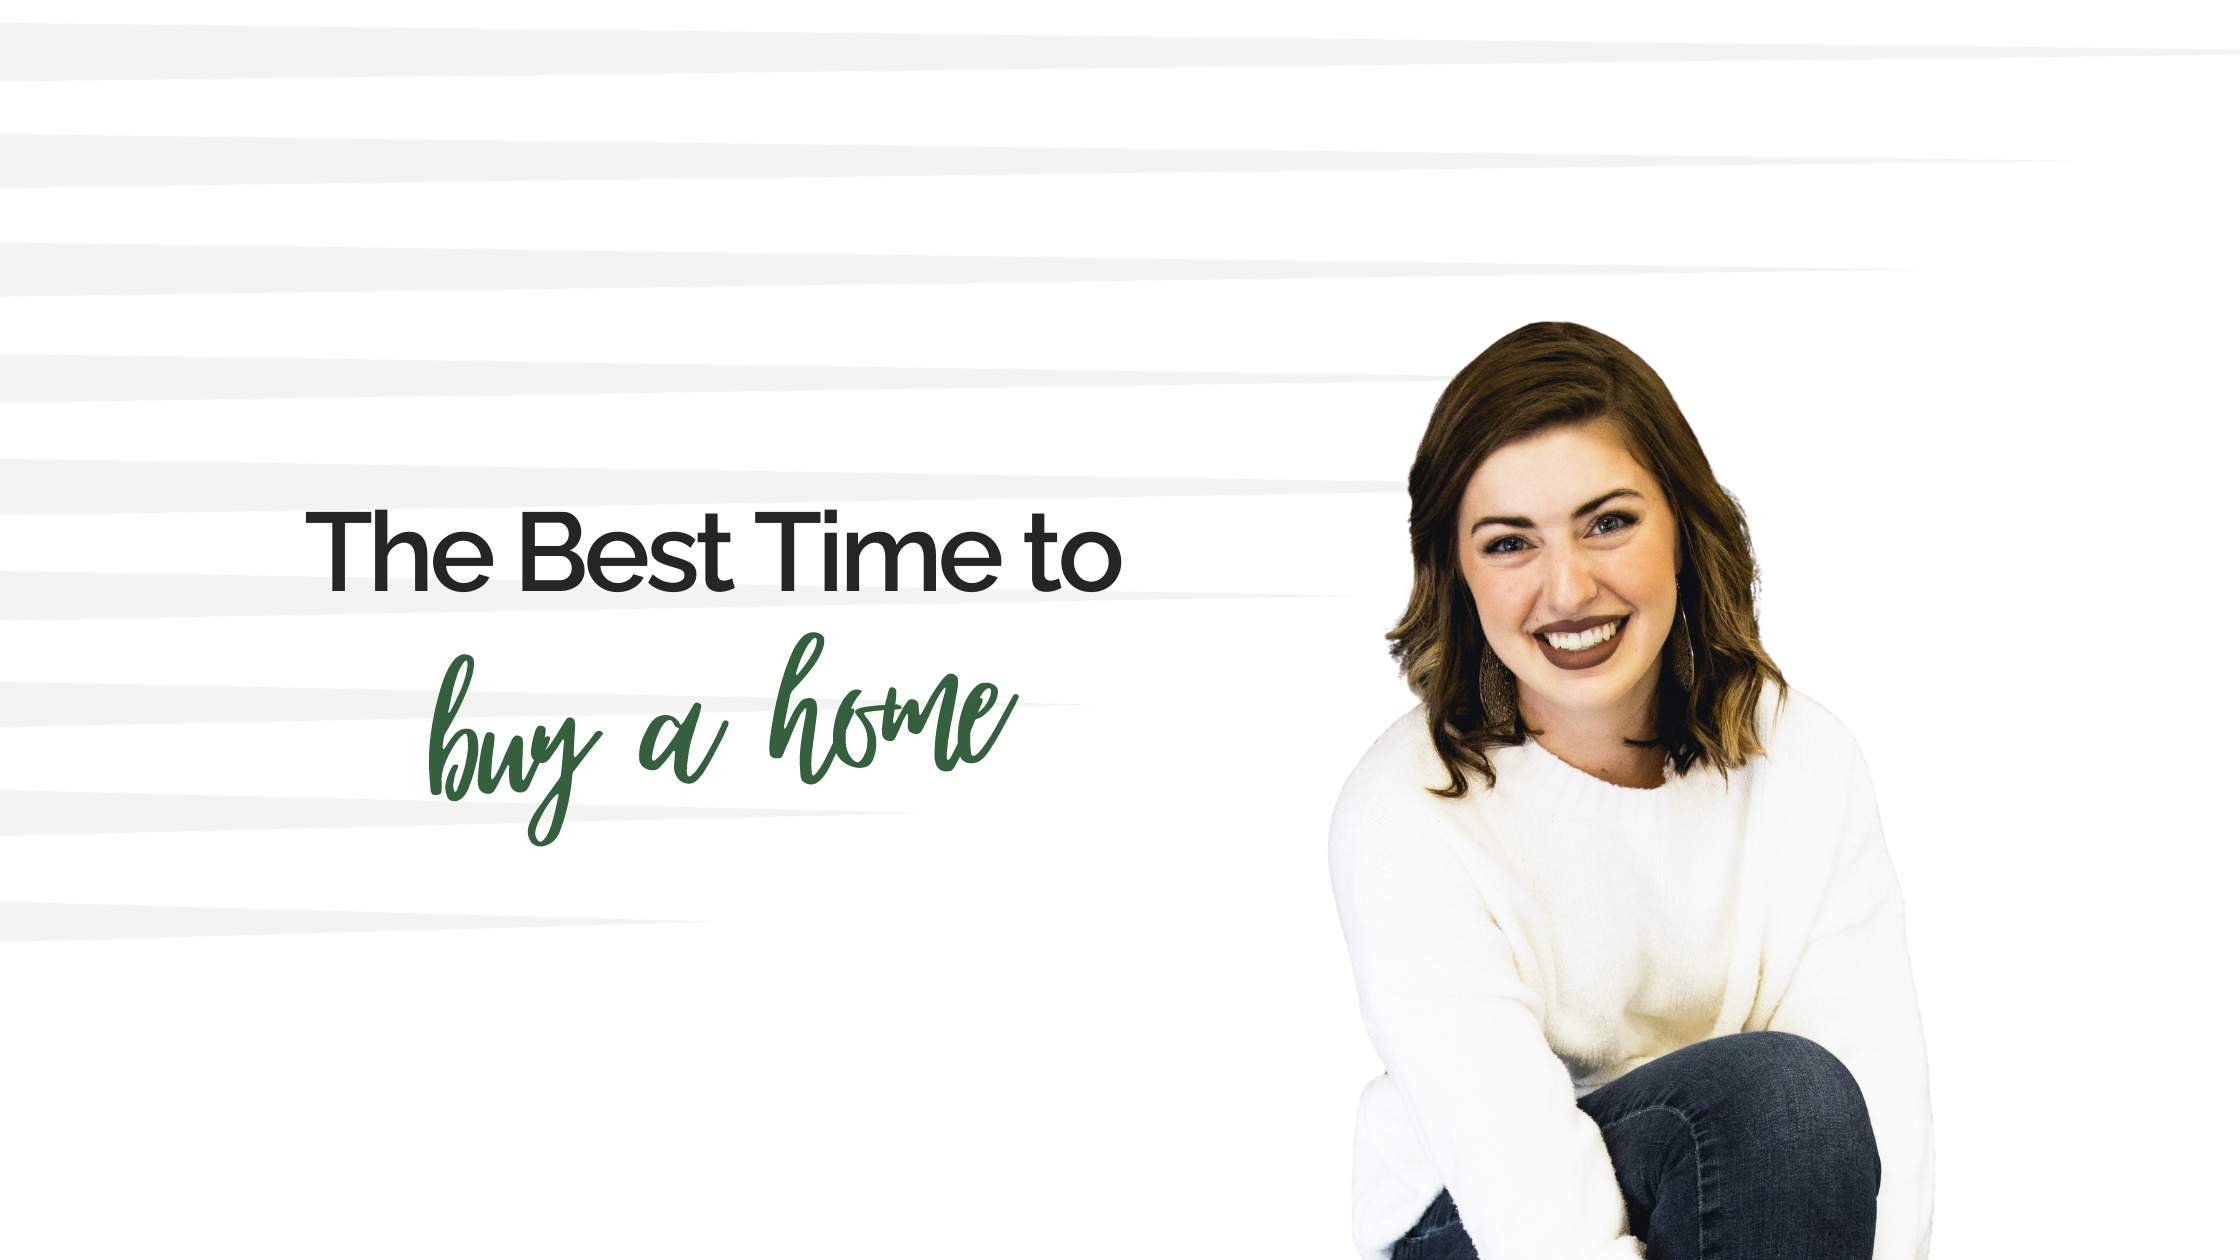 The best time to buy a home